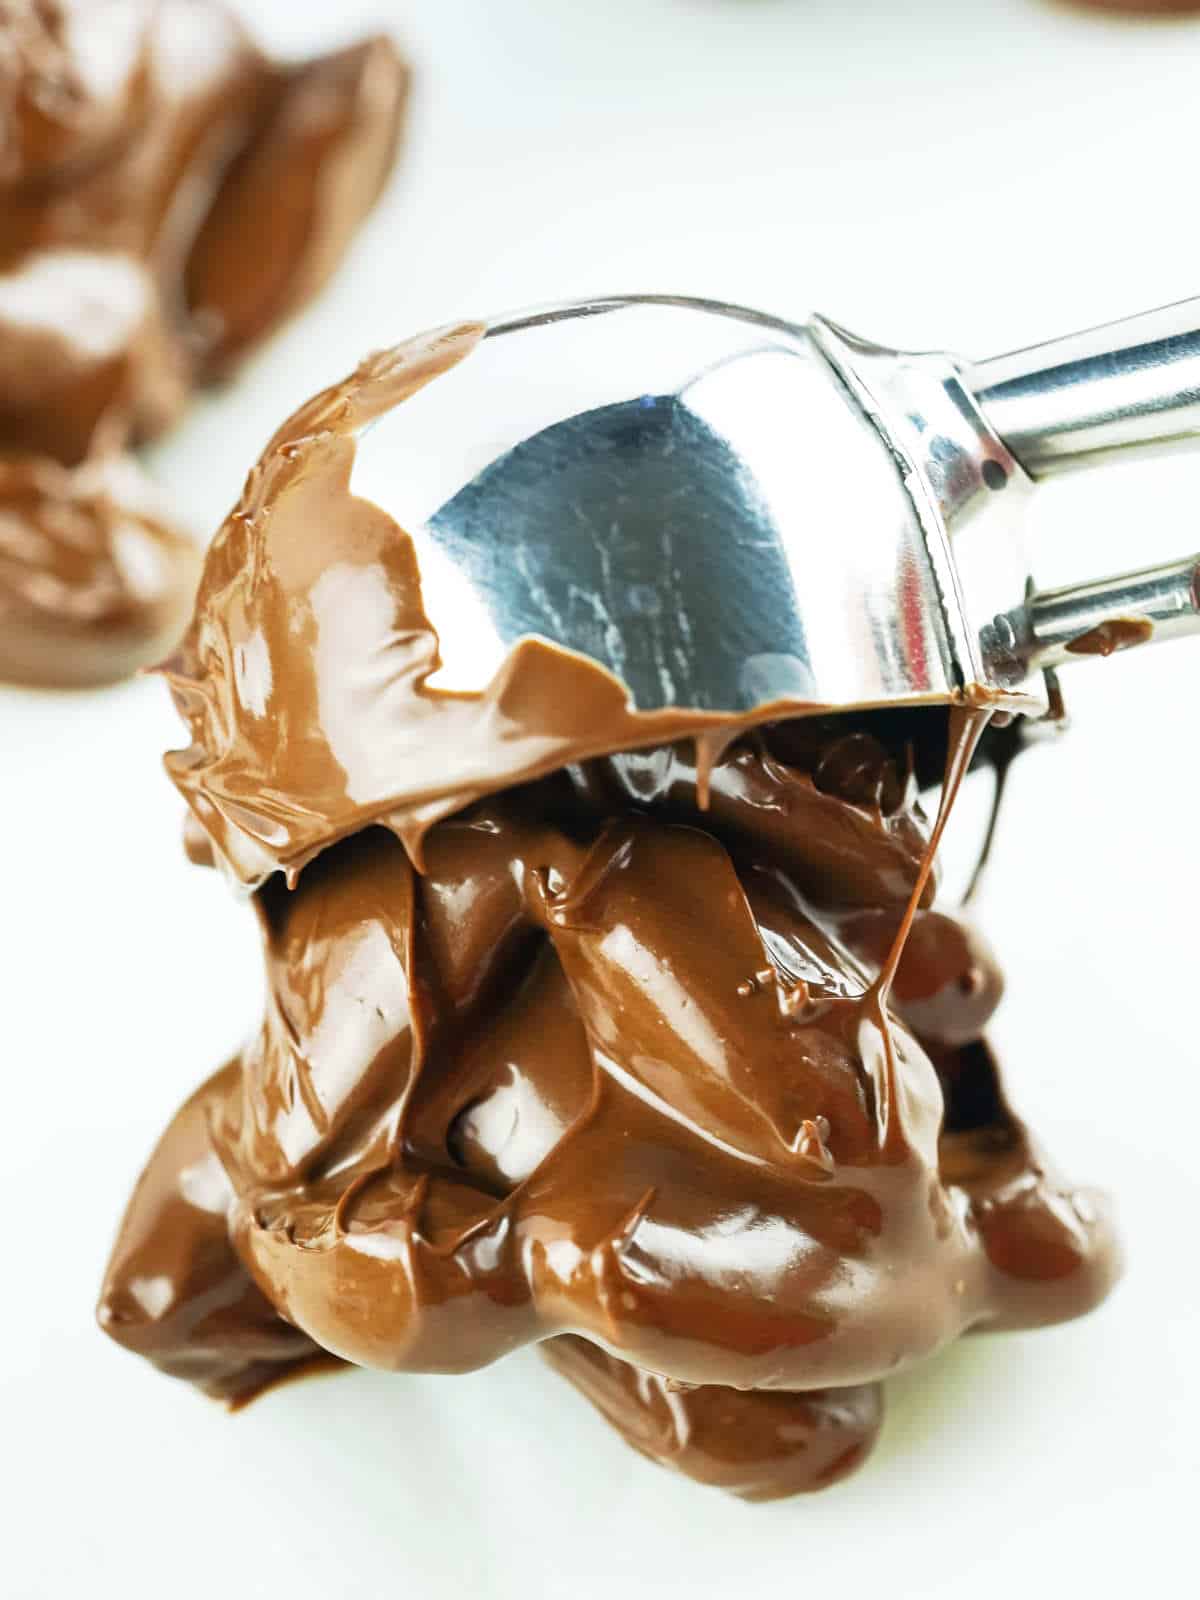 Scoop of melted chocolate covered almonds being placed on parchment paper.